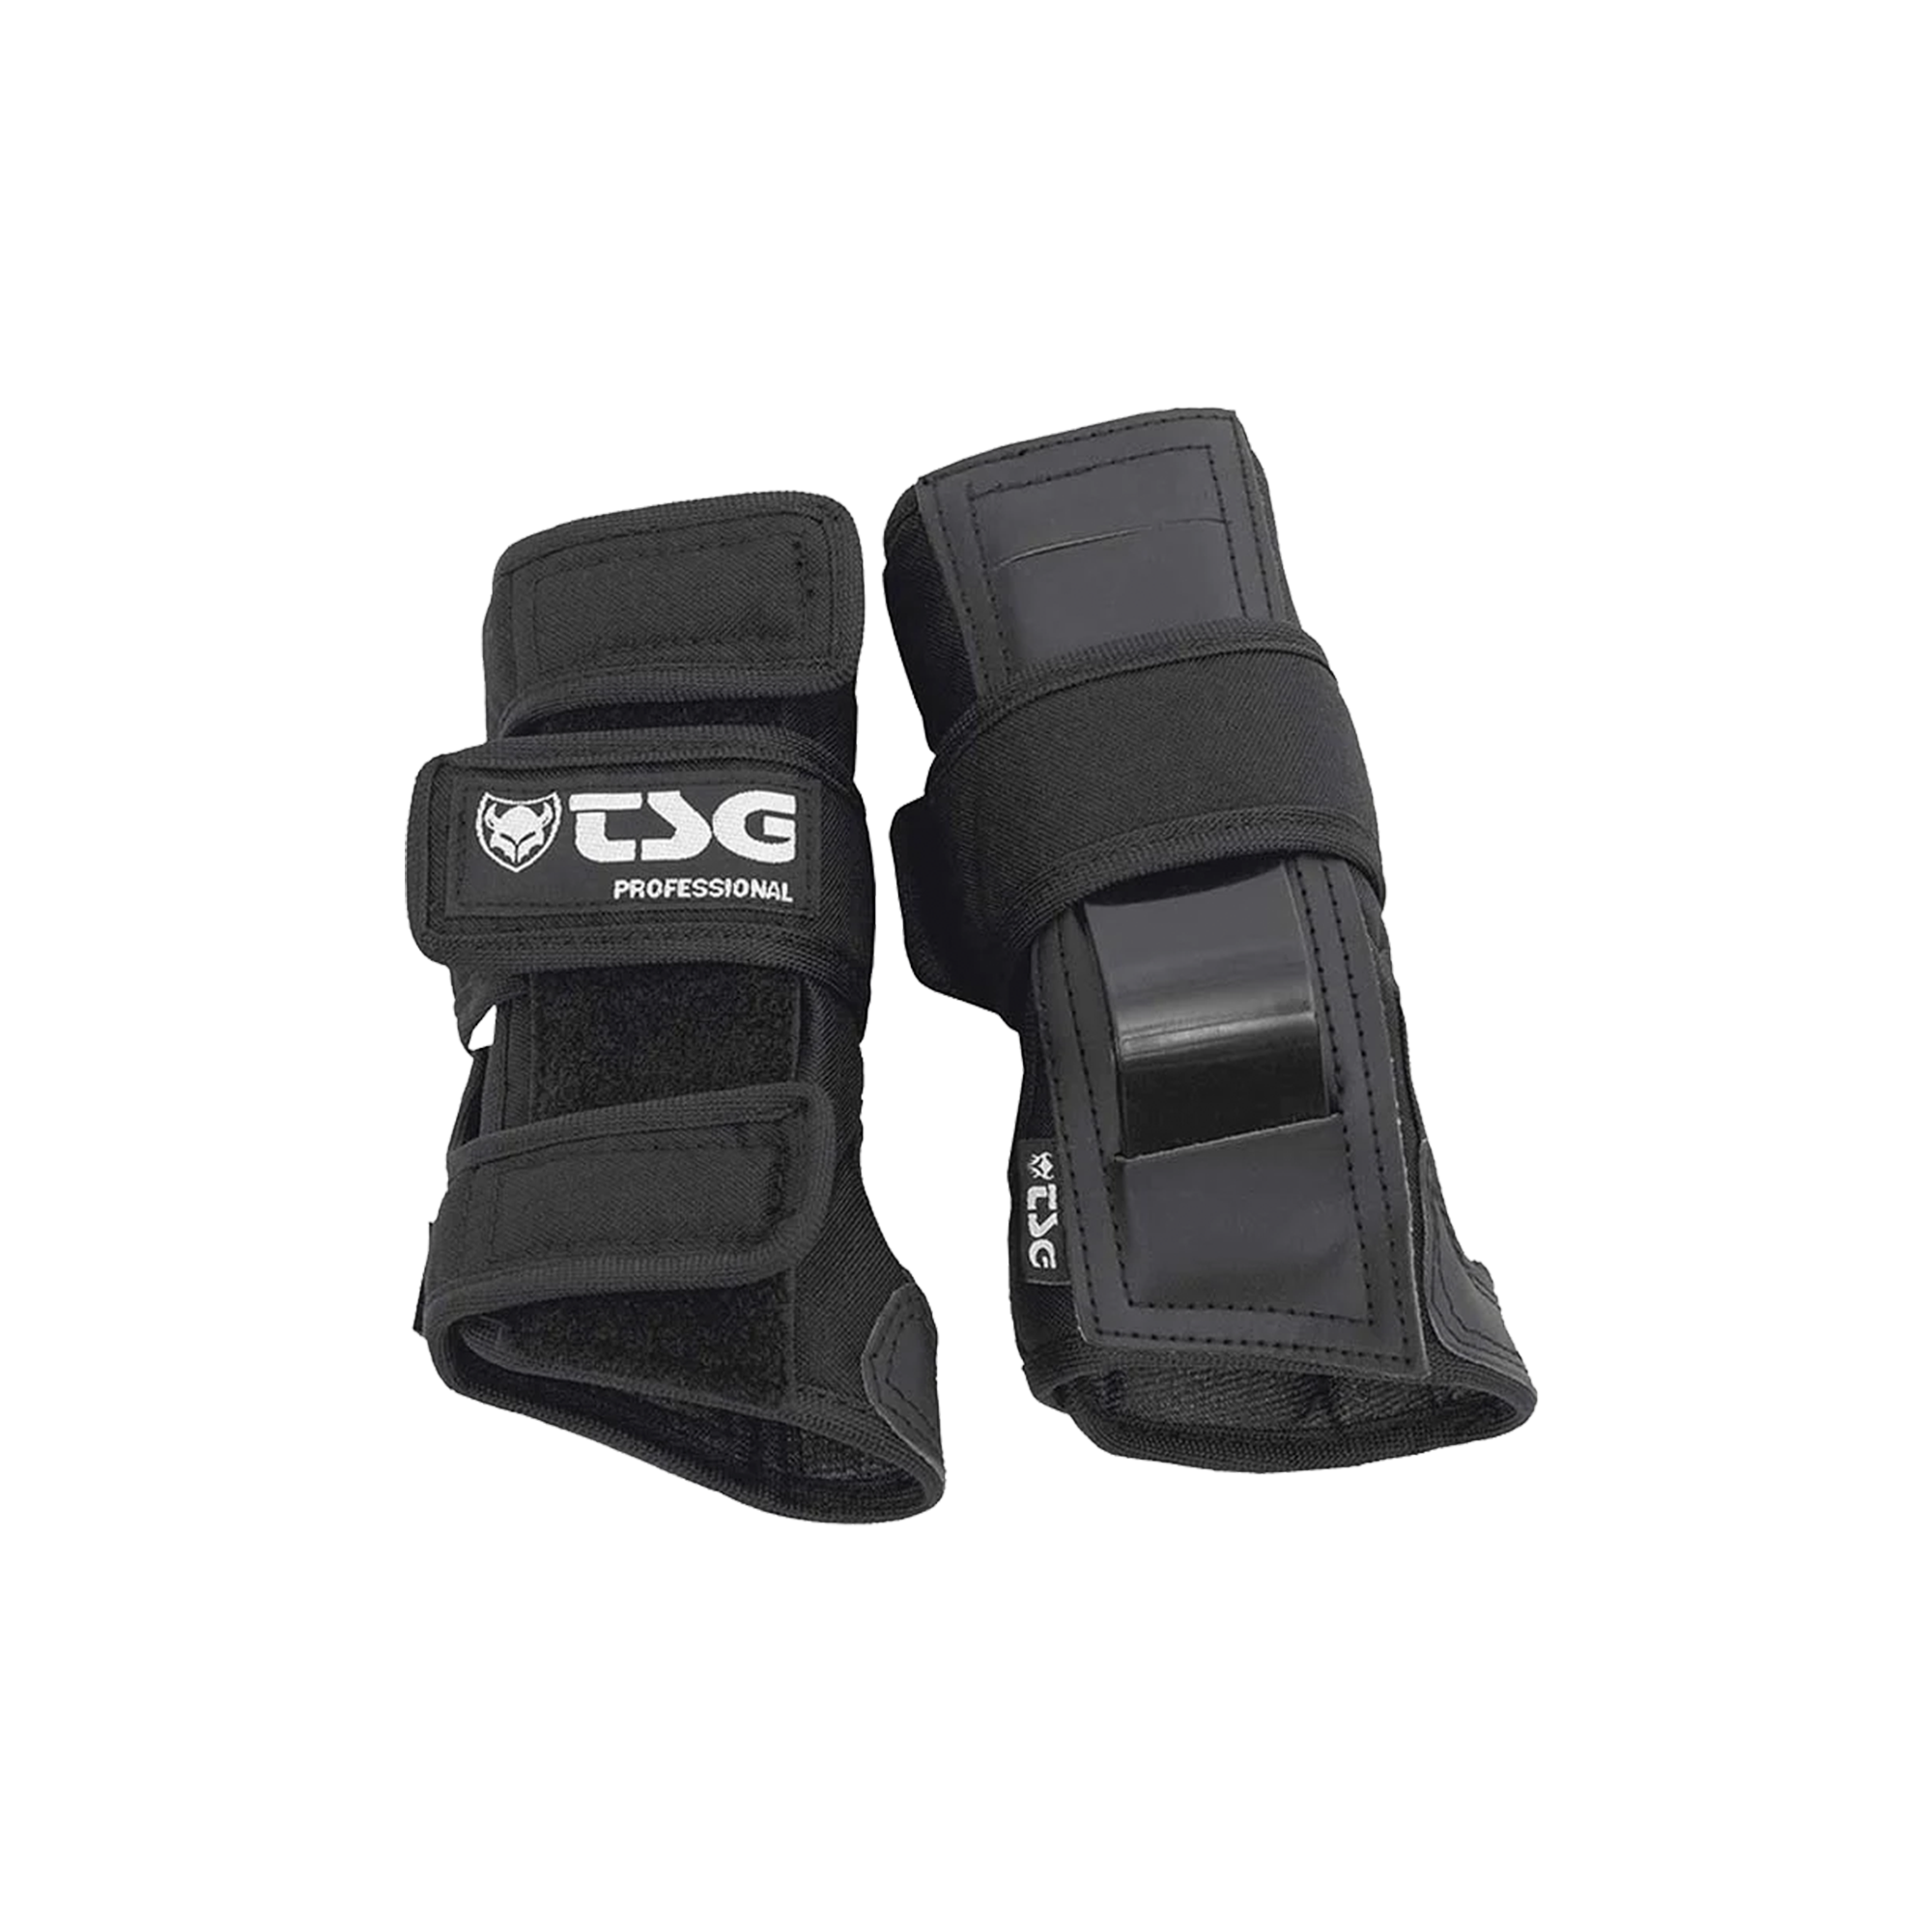 Fingerless Pro E-Skate Glove from flatland3d and Knox - electric